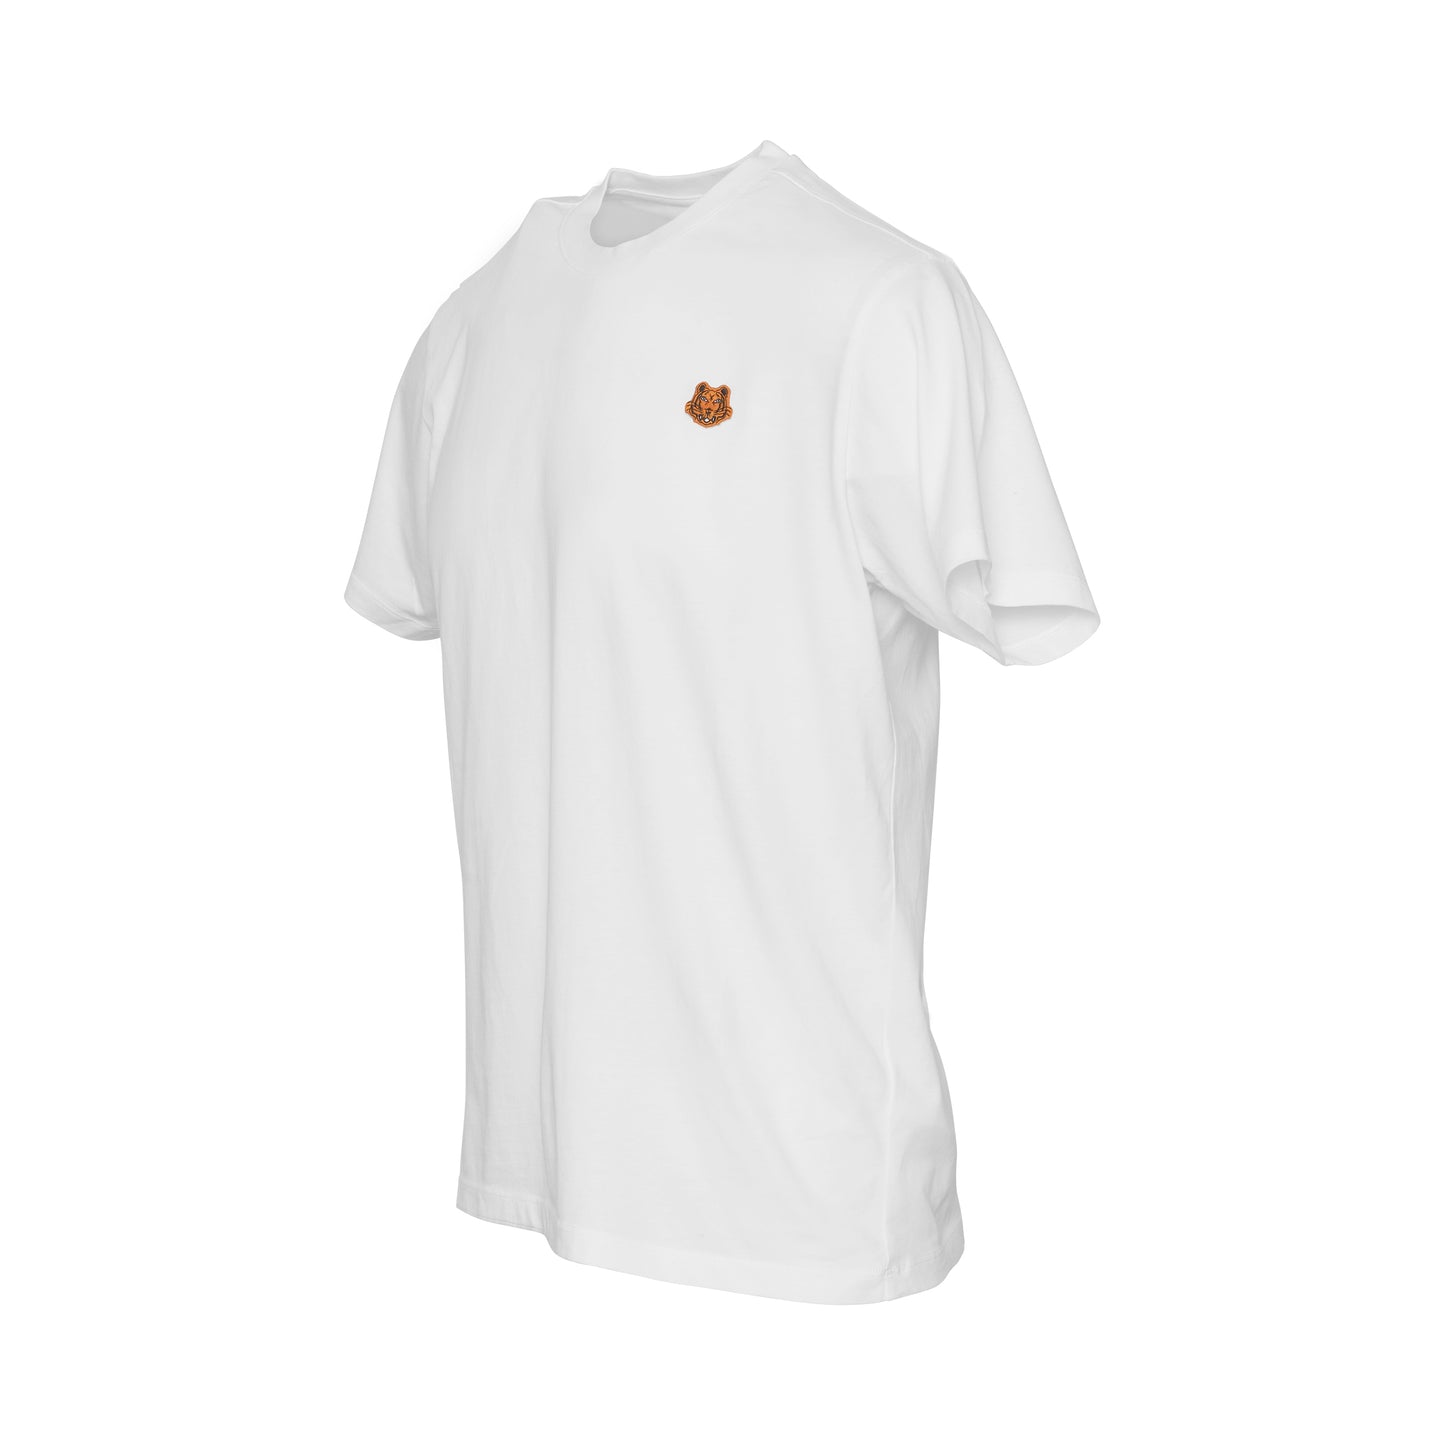 Kenzo Tiger Crest T-Shirt in White